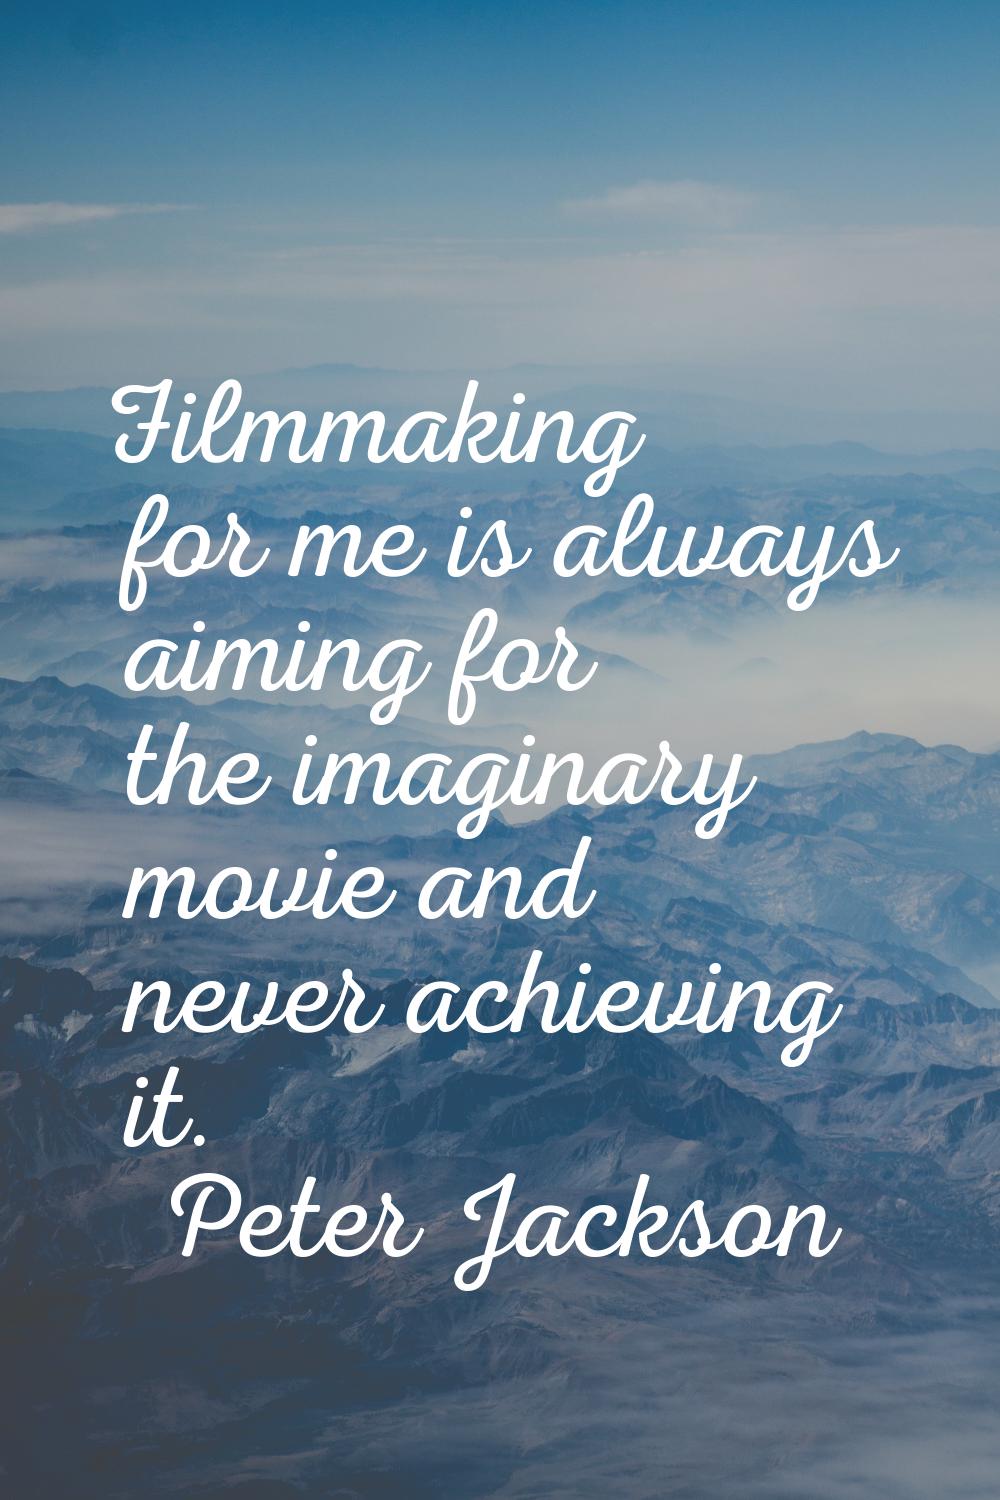 Filmmaking for me is always aiming for the imaginary movie and never achieving it.